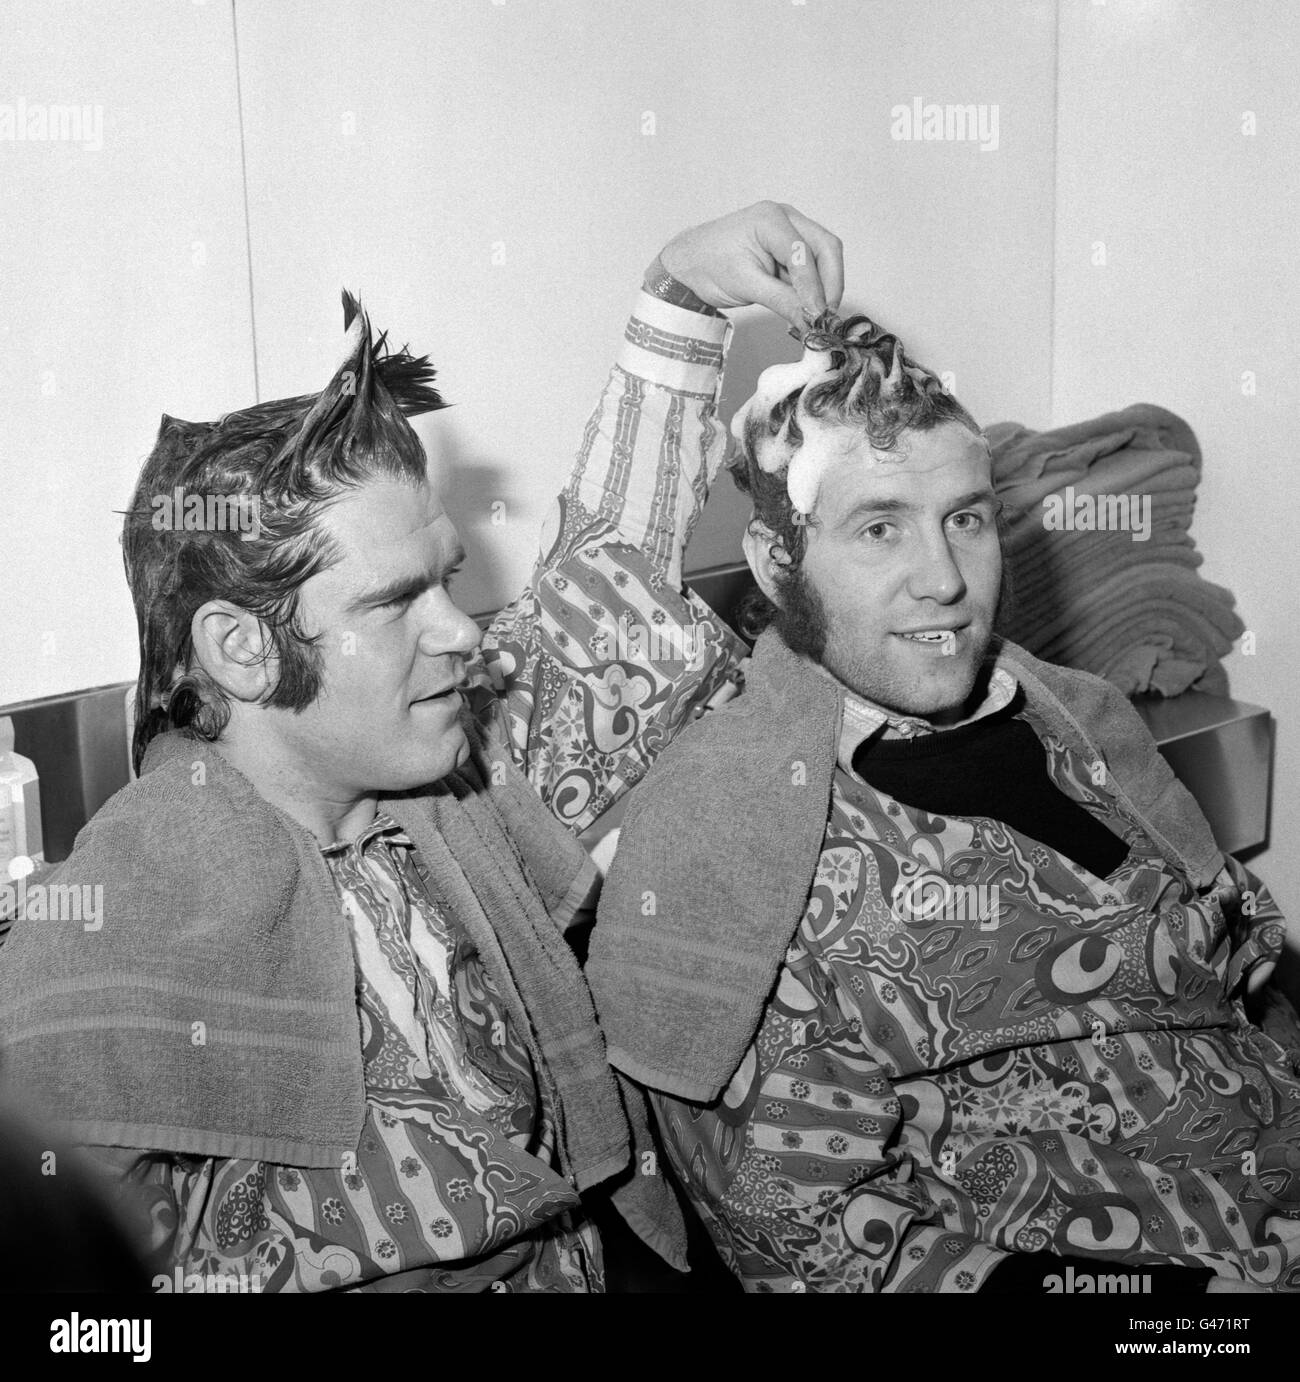 Chelsea stars David Webb (l) and Peter Osgood (r) pictured at Vidal Sassoon's Belgravia Salon. The society hairstylist, an ardent Chelsea fan, promised the players a free haircut should they reach the League Cup Final. Chelsea however would go on to lose the final 2-1 to Stoke City. Stock Photo